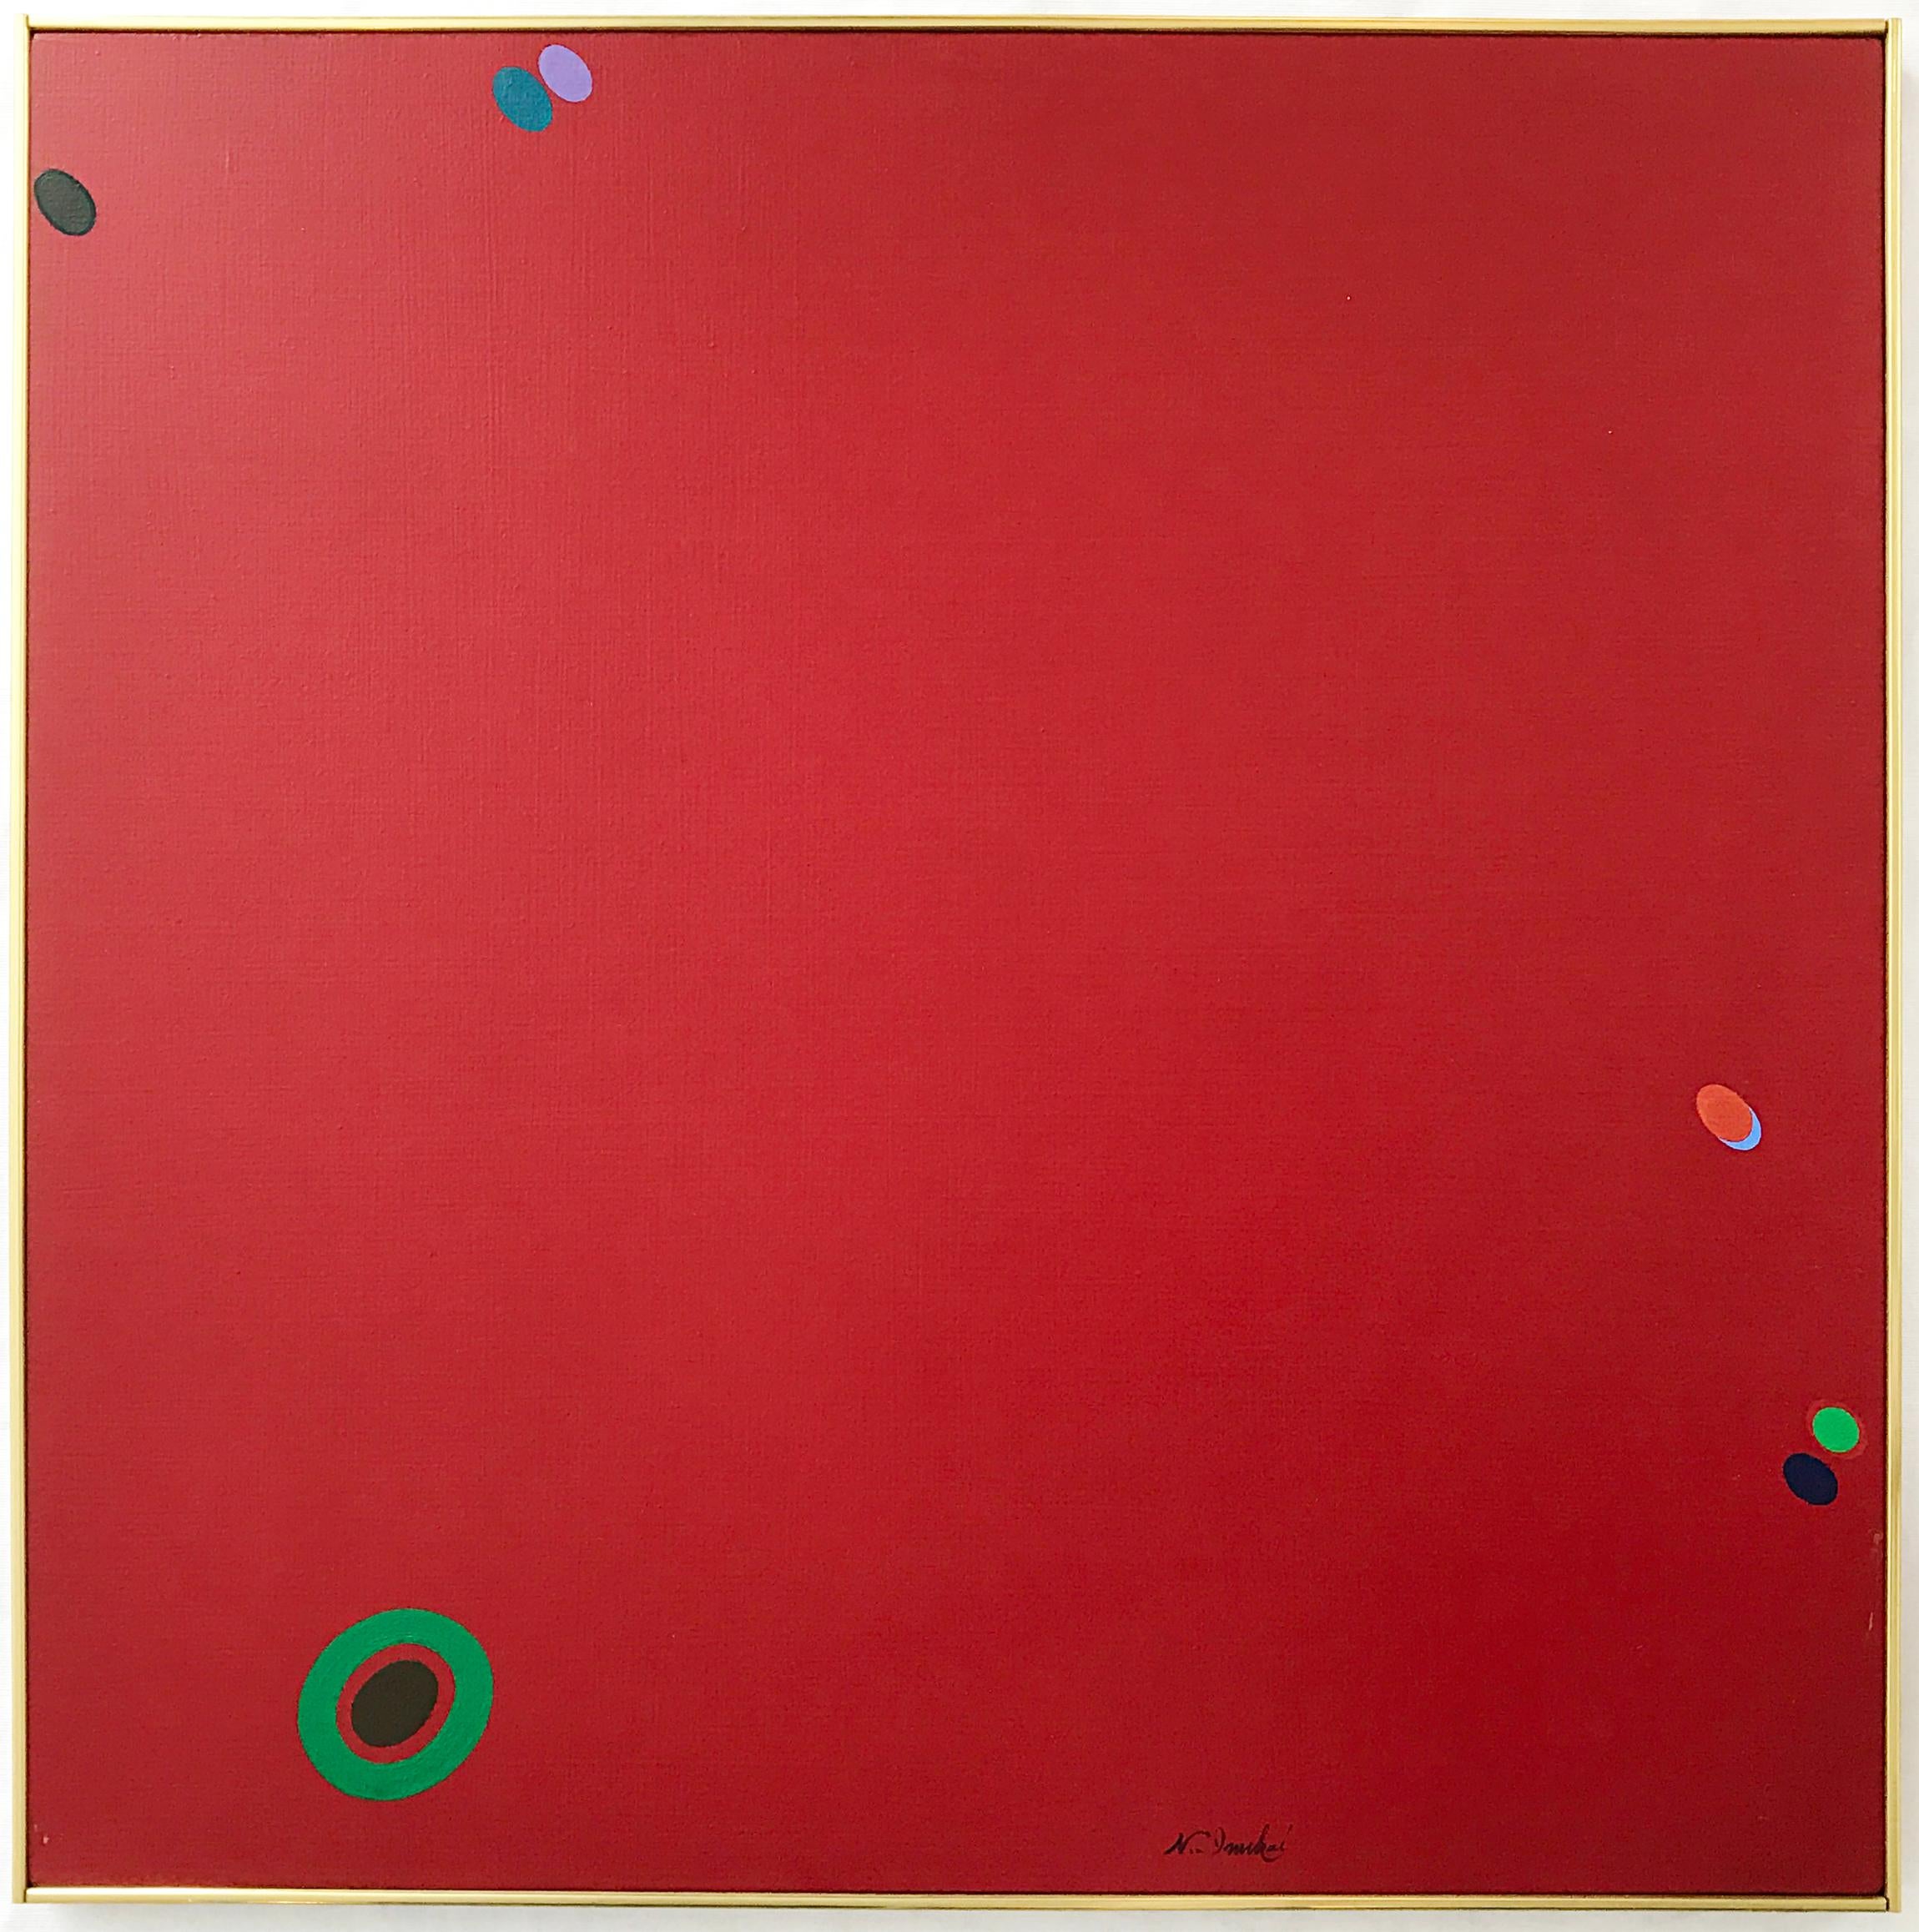 Untitled Red with Floating Dots painting by Naohiko Inukai